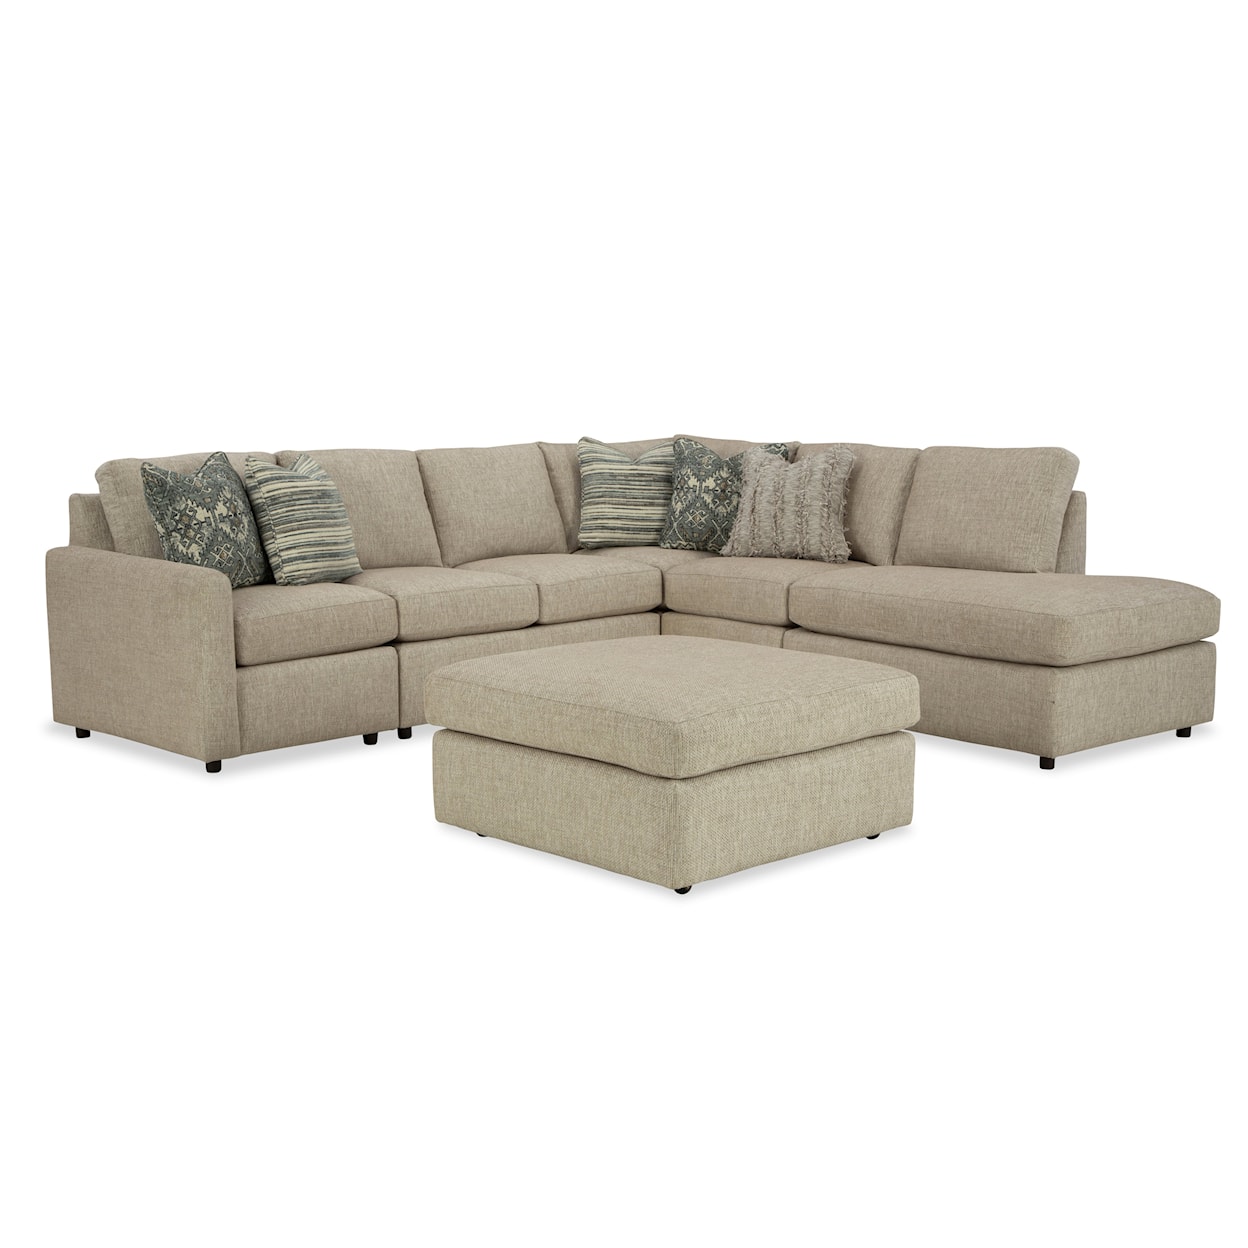 Craftmaster 738050 4-Piece Sectional Sofa